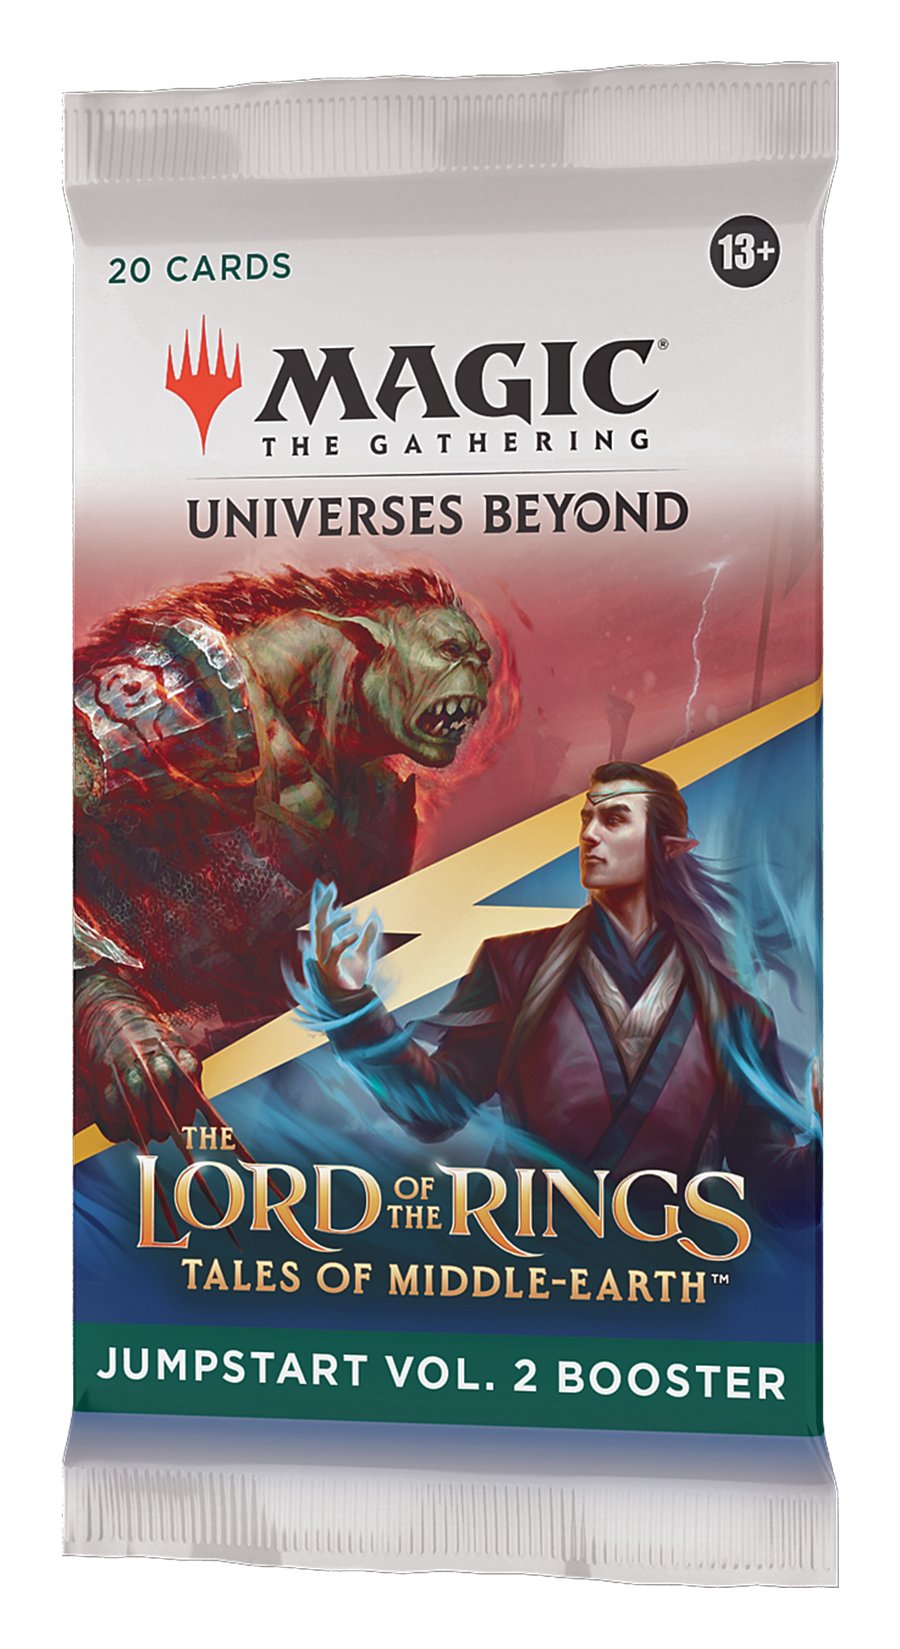 Magic: The Gathering The Lord of the Rings: Tales of Middle-earth Jumpstart Vol. 2 Booster